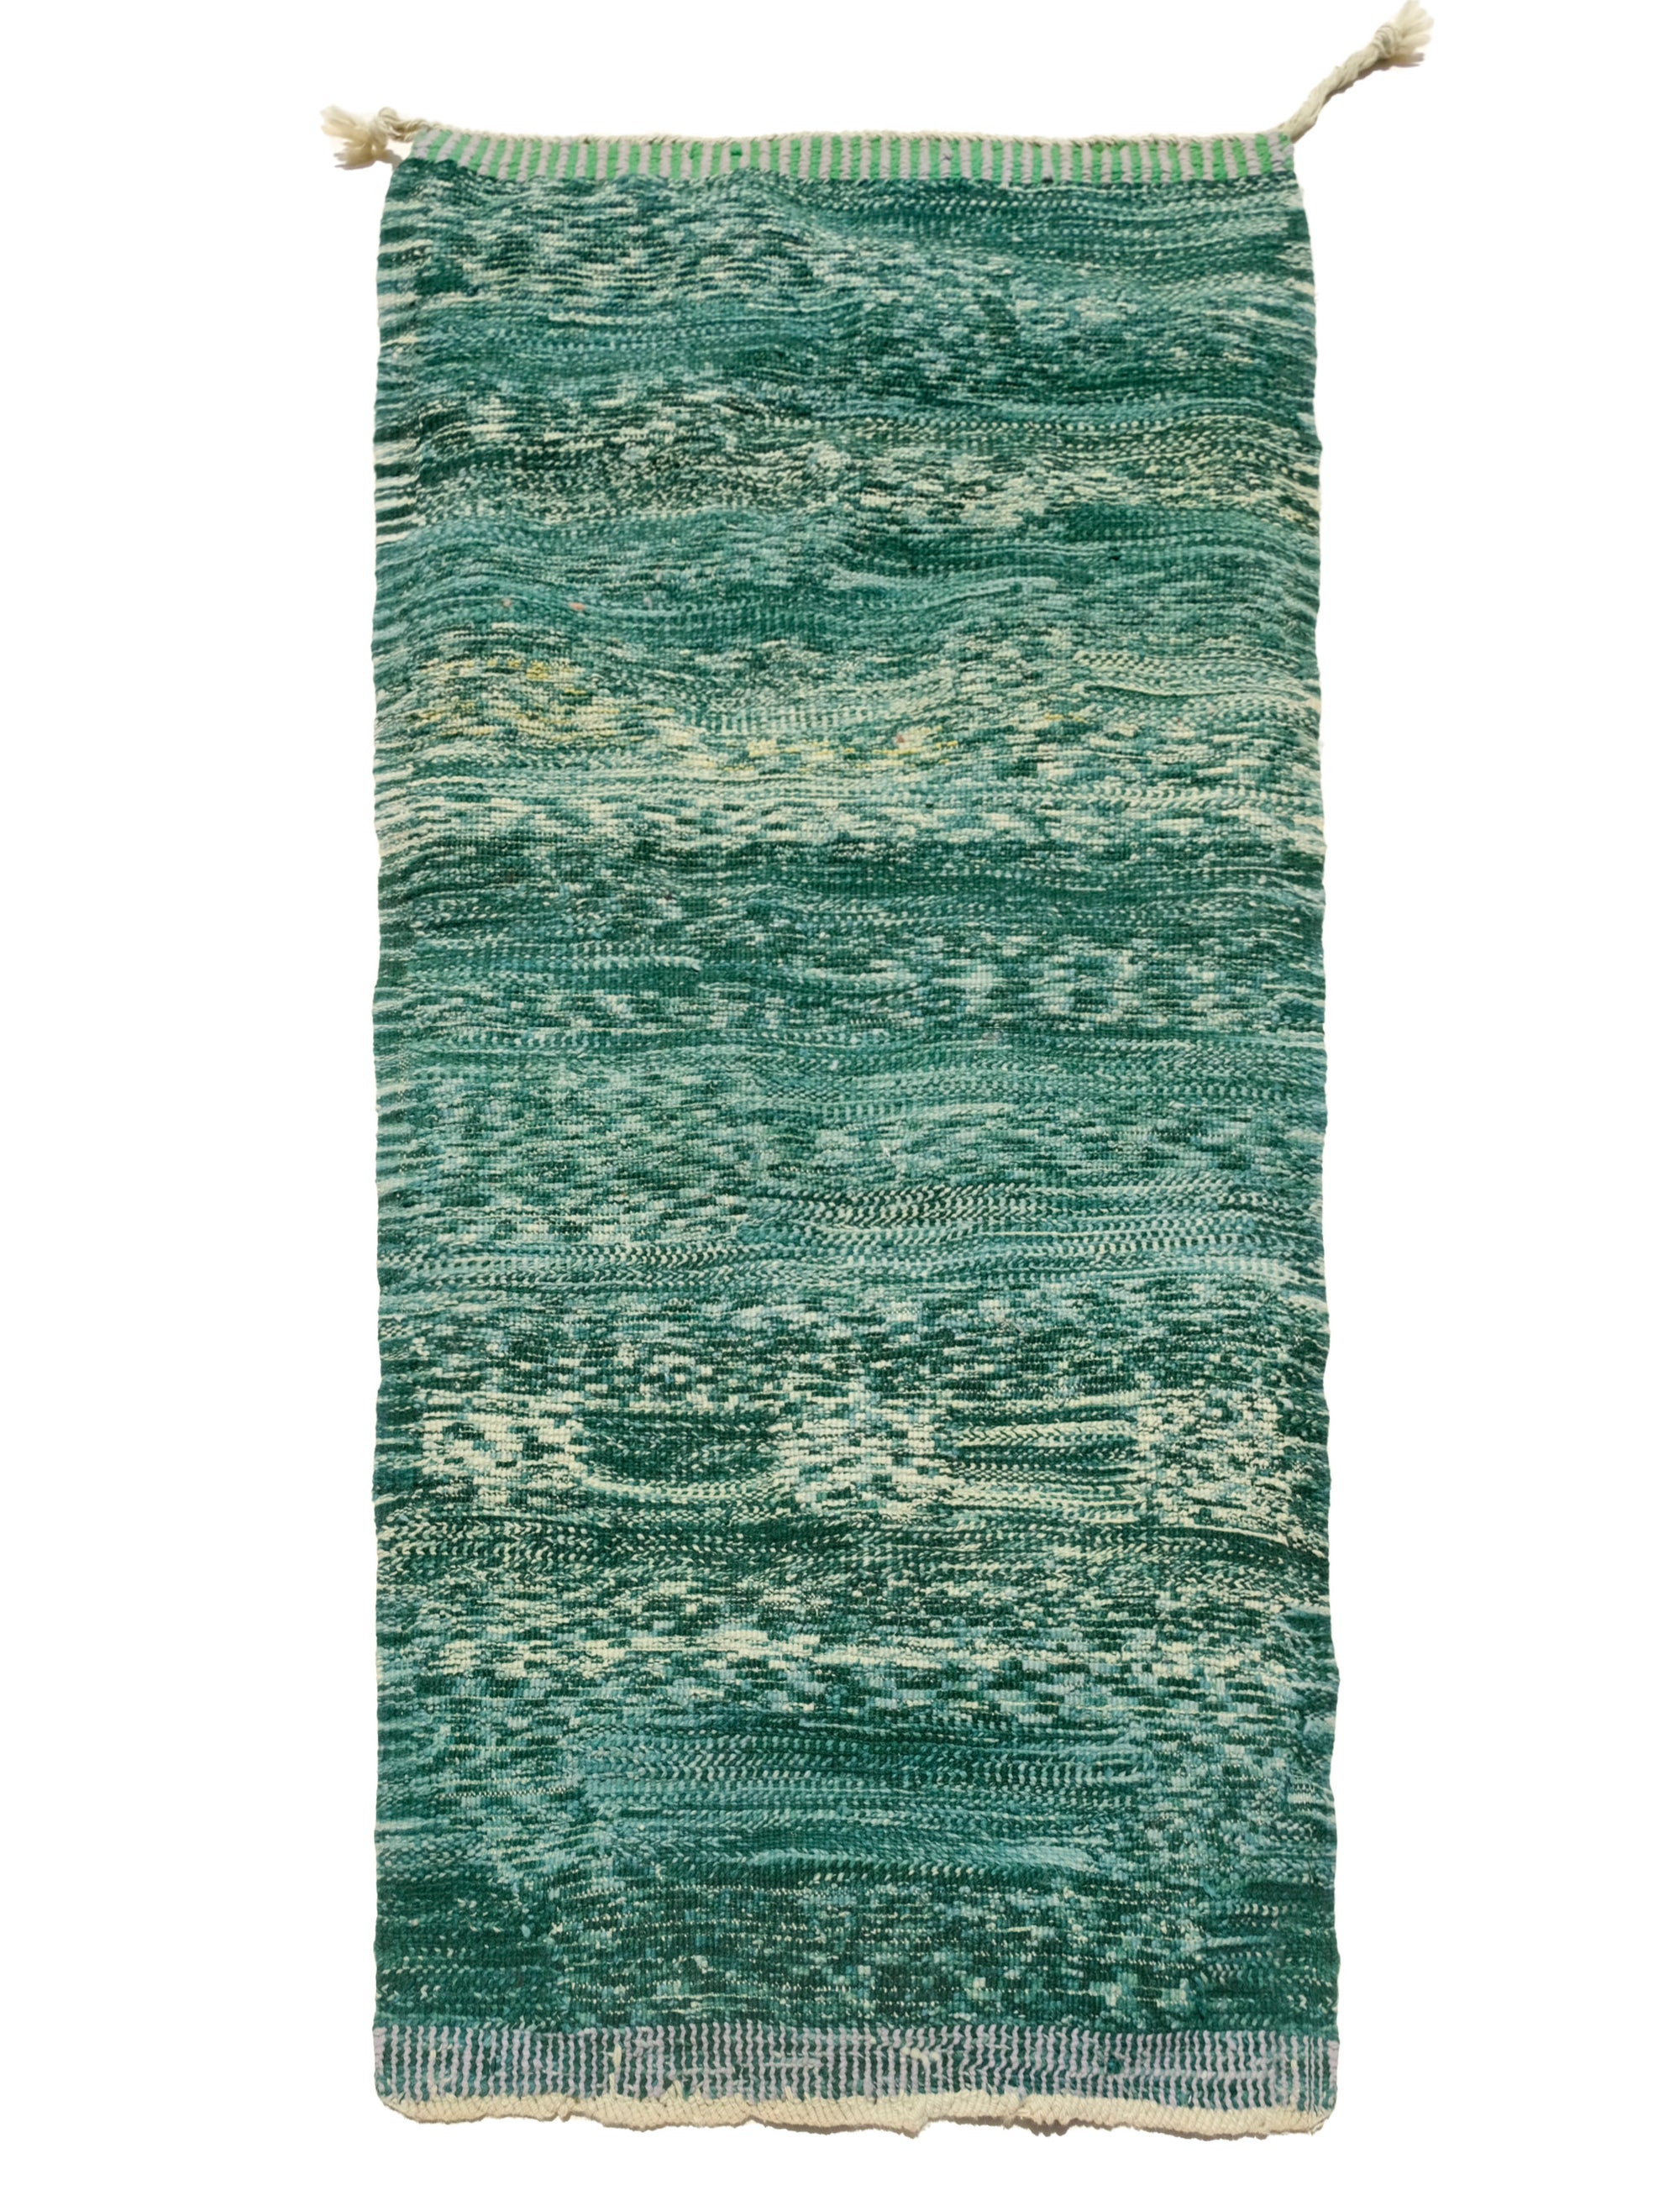 "Verdant Whispers Wanted Rug" – lush greens and an intriguing message woven with a playful touch. Perfect for adding a unique, contemporary element to your space.